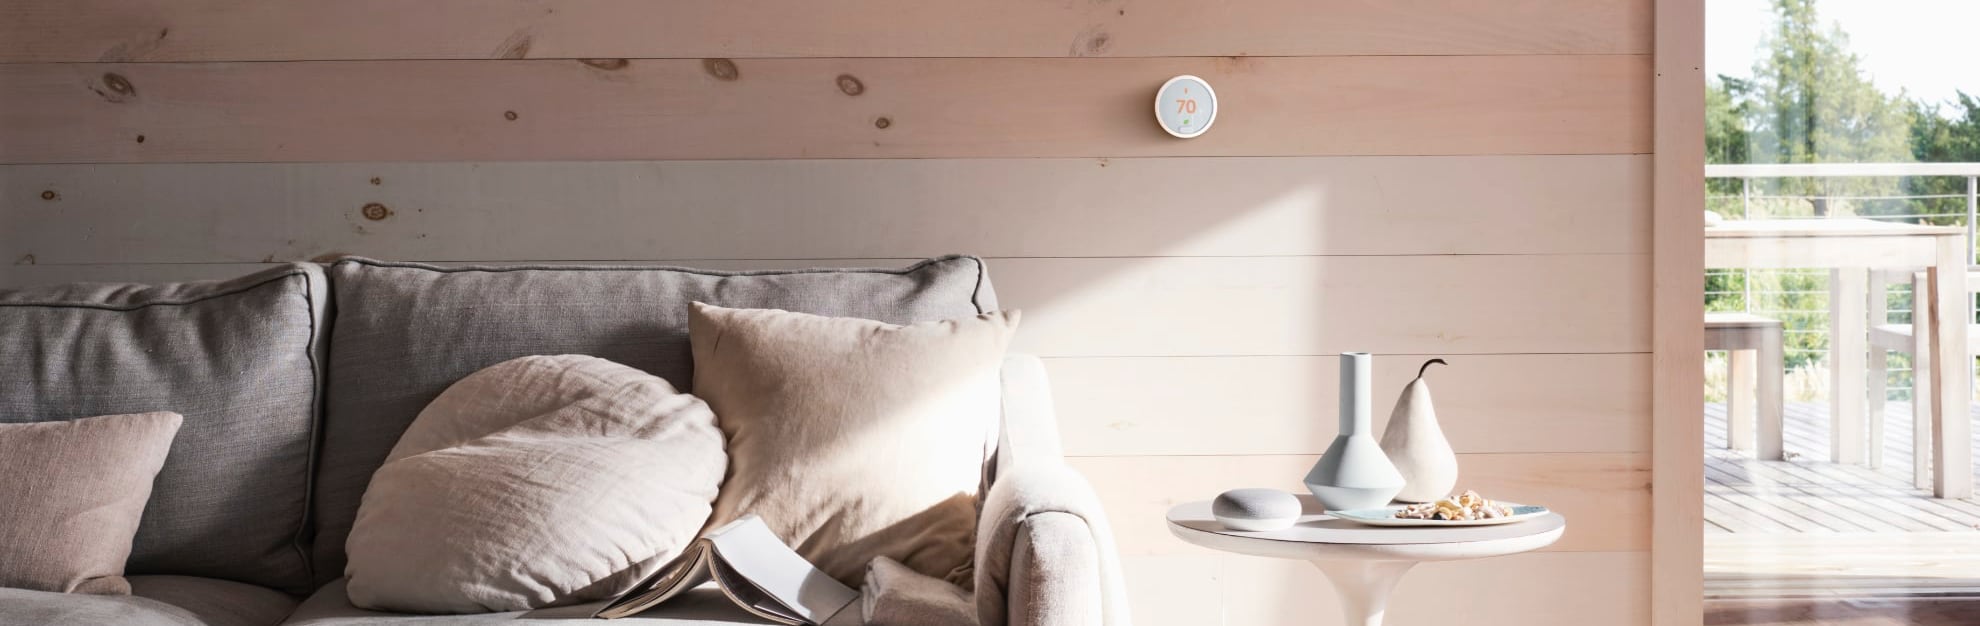 Vivint Home Automation in Fort Smith